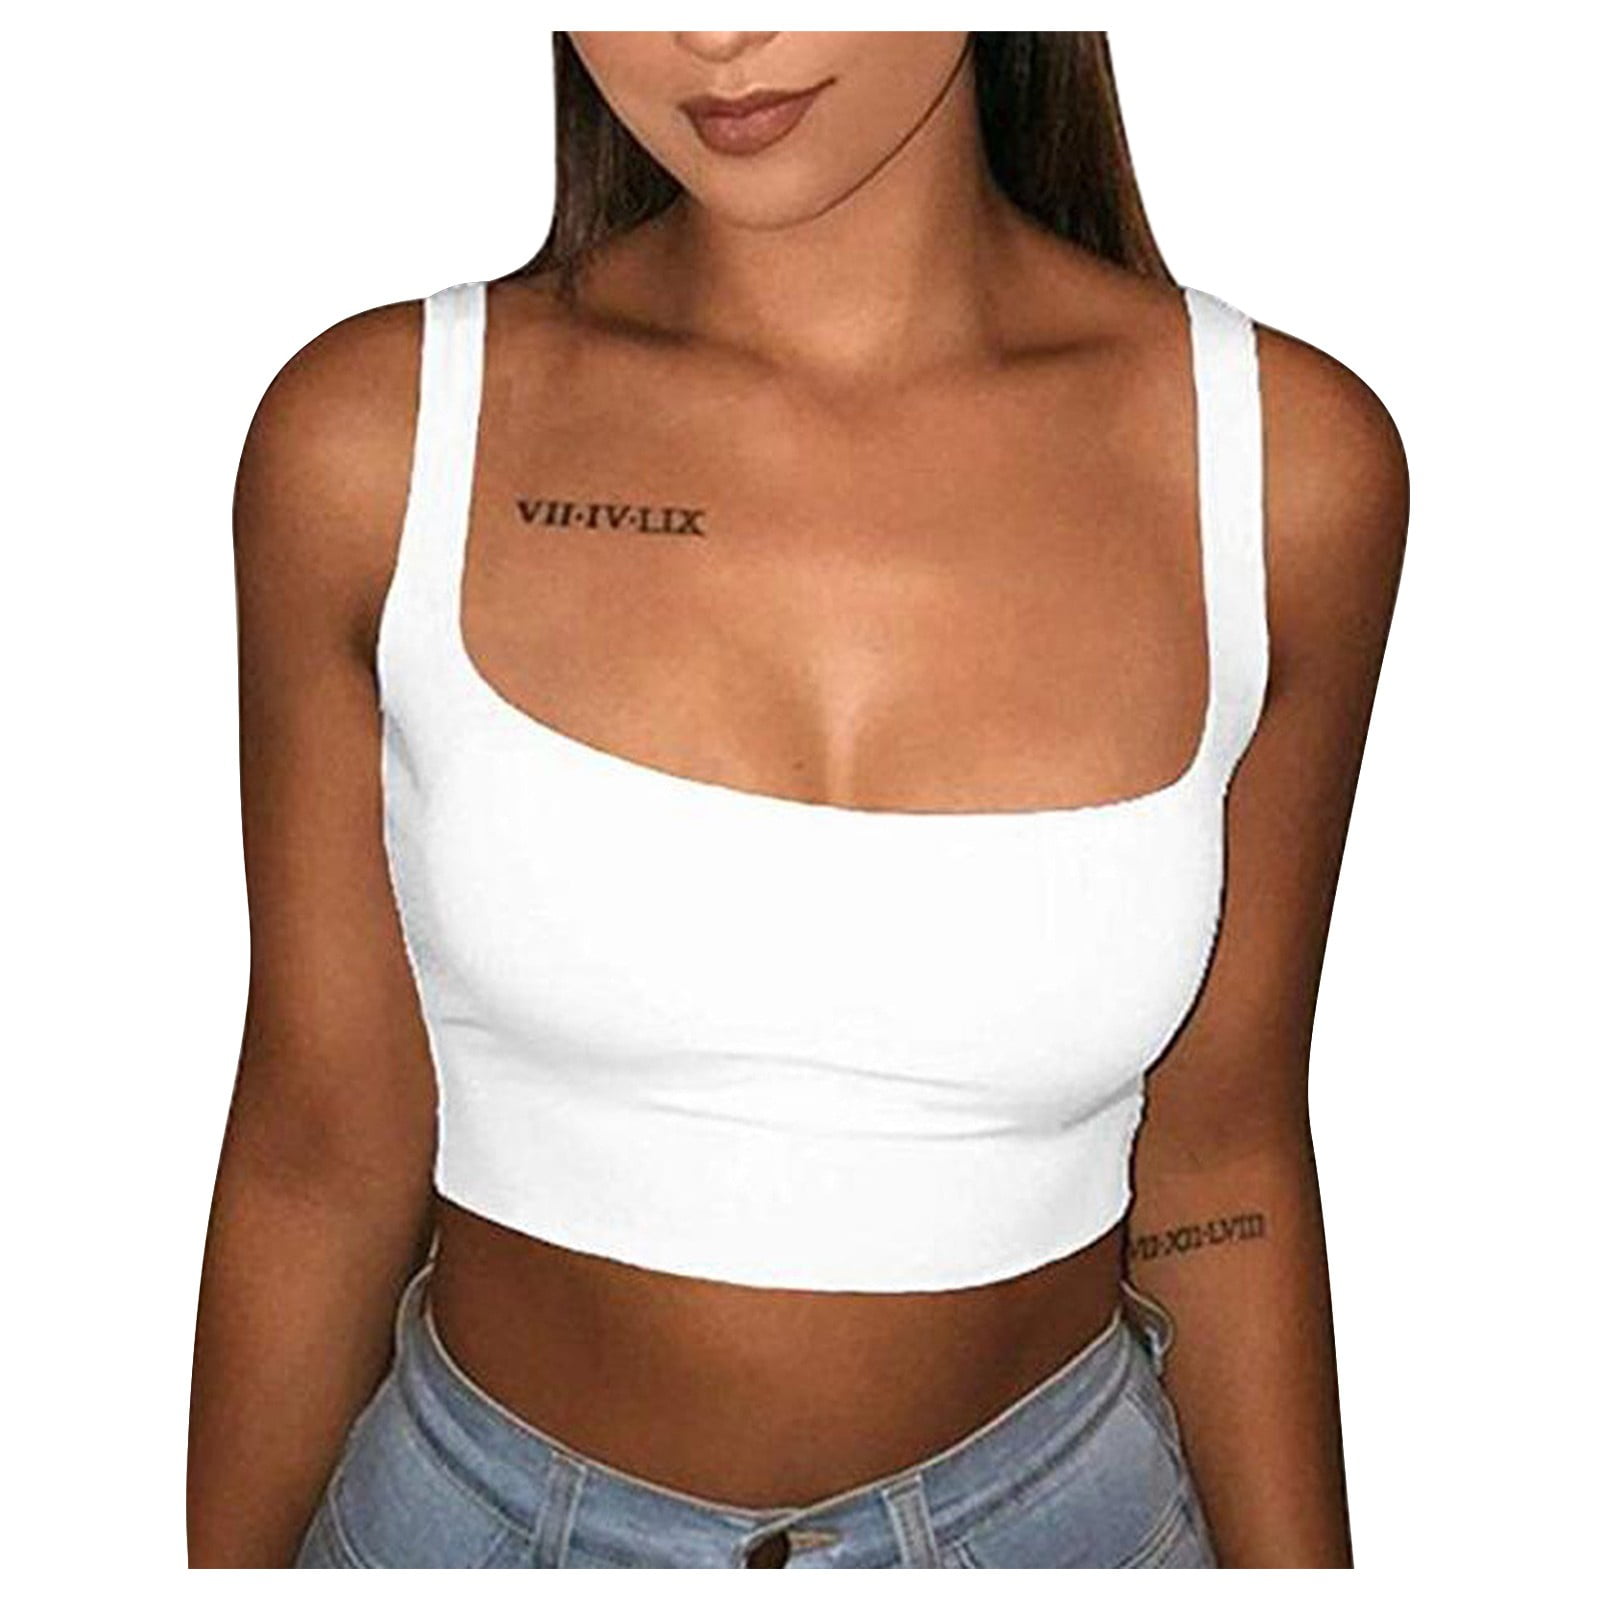 Ribbed Crop Top Tank - Ribbed Material - Sleeveless Crop Style - 92%  Polyester/ 8% Spandex, 7319958